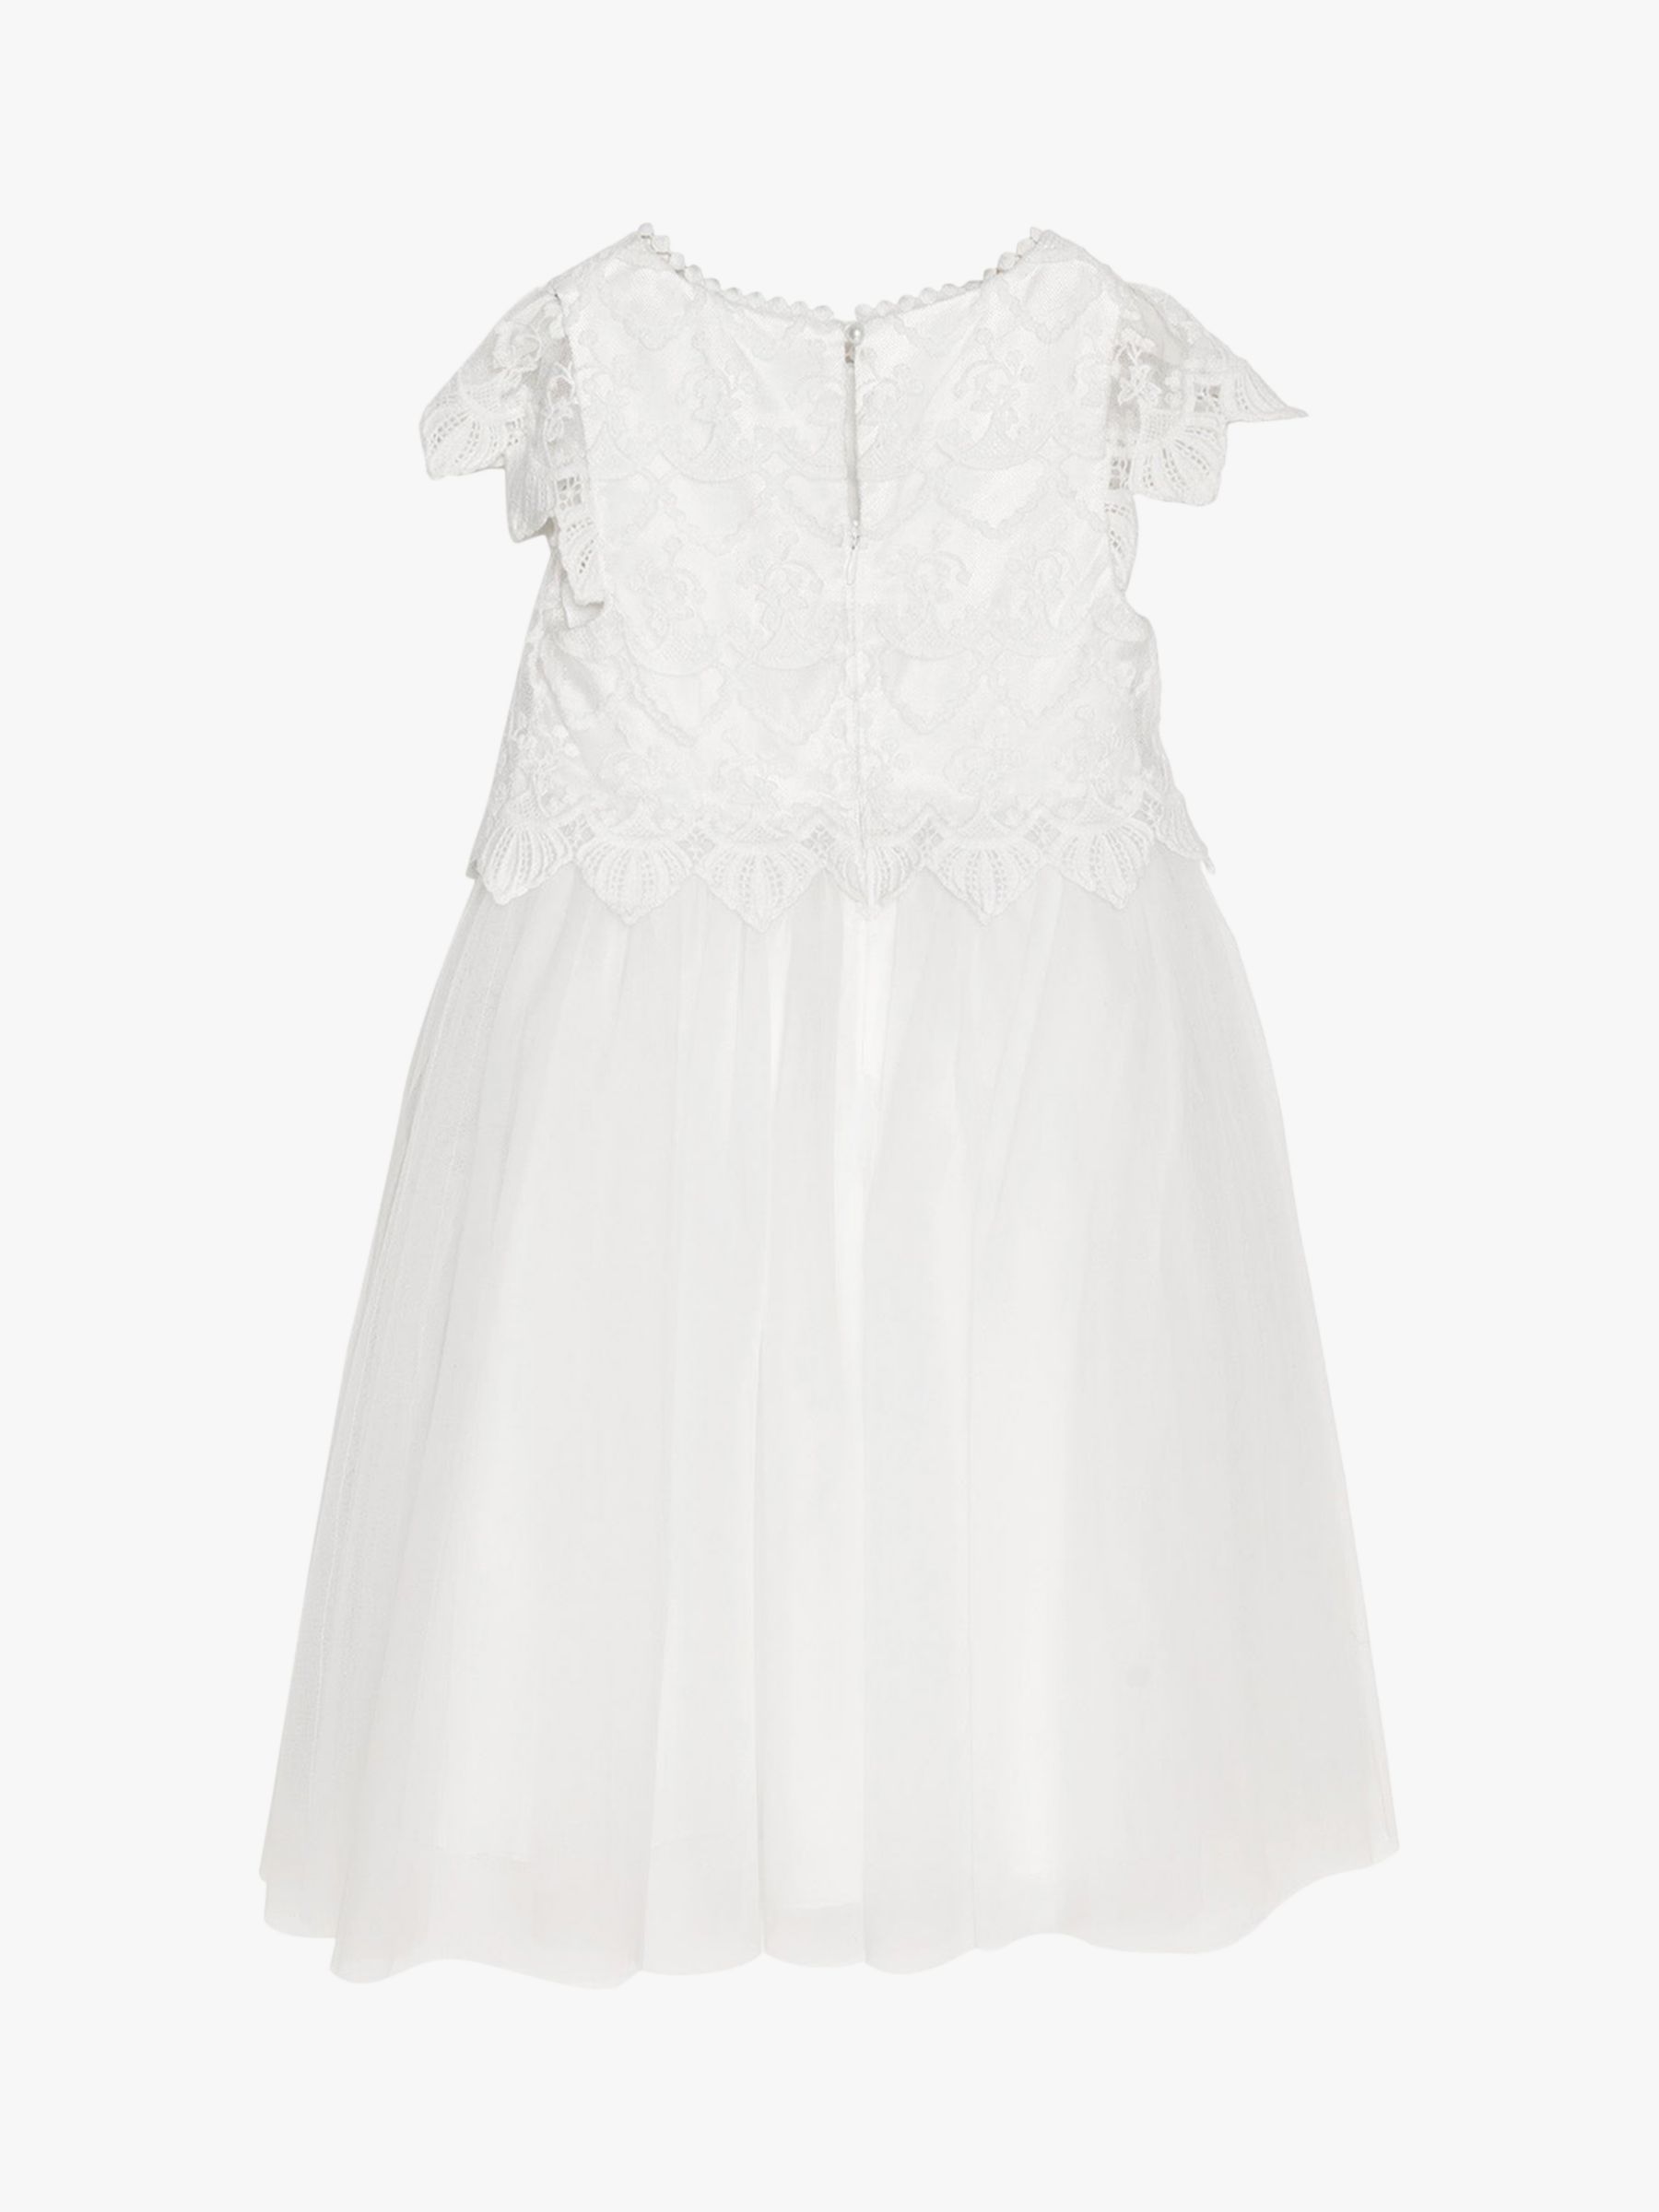 Angel & Rocket Kids' Lucy Lace Bridesmaid Dress, Ivory, 2 years